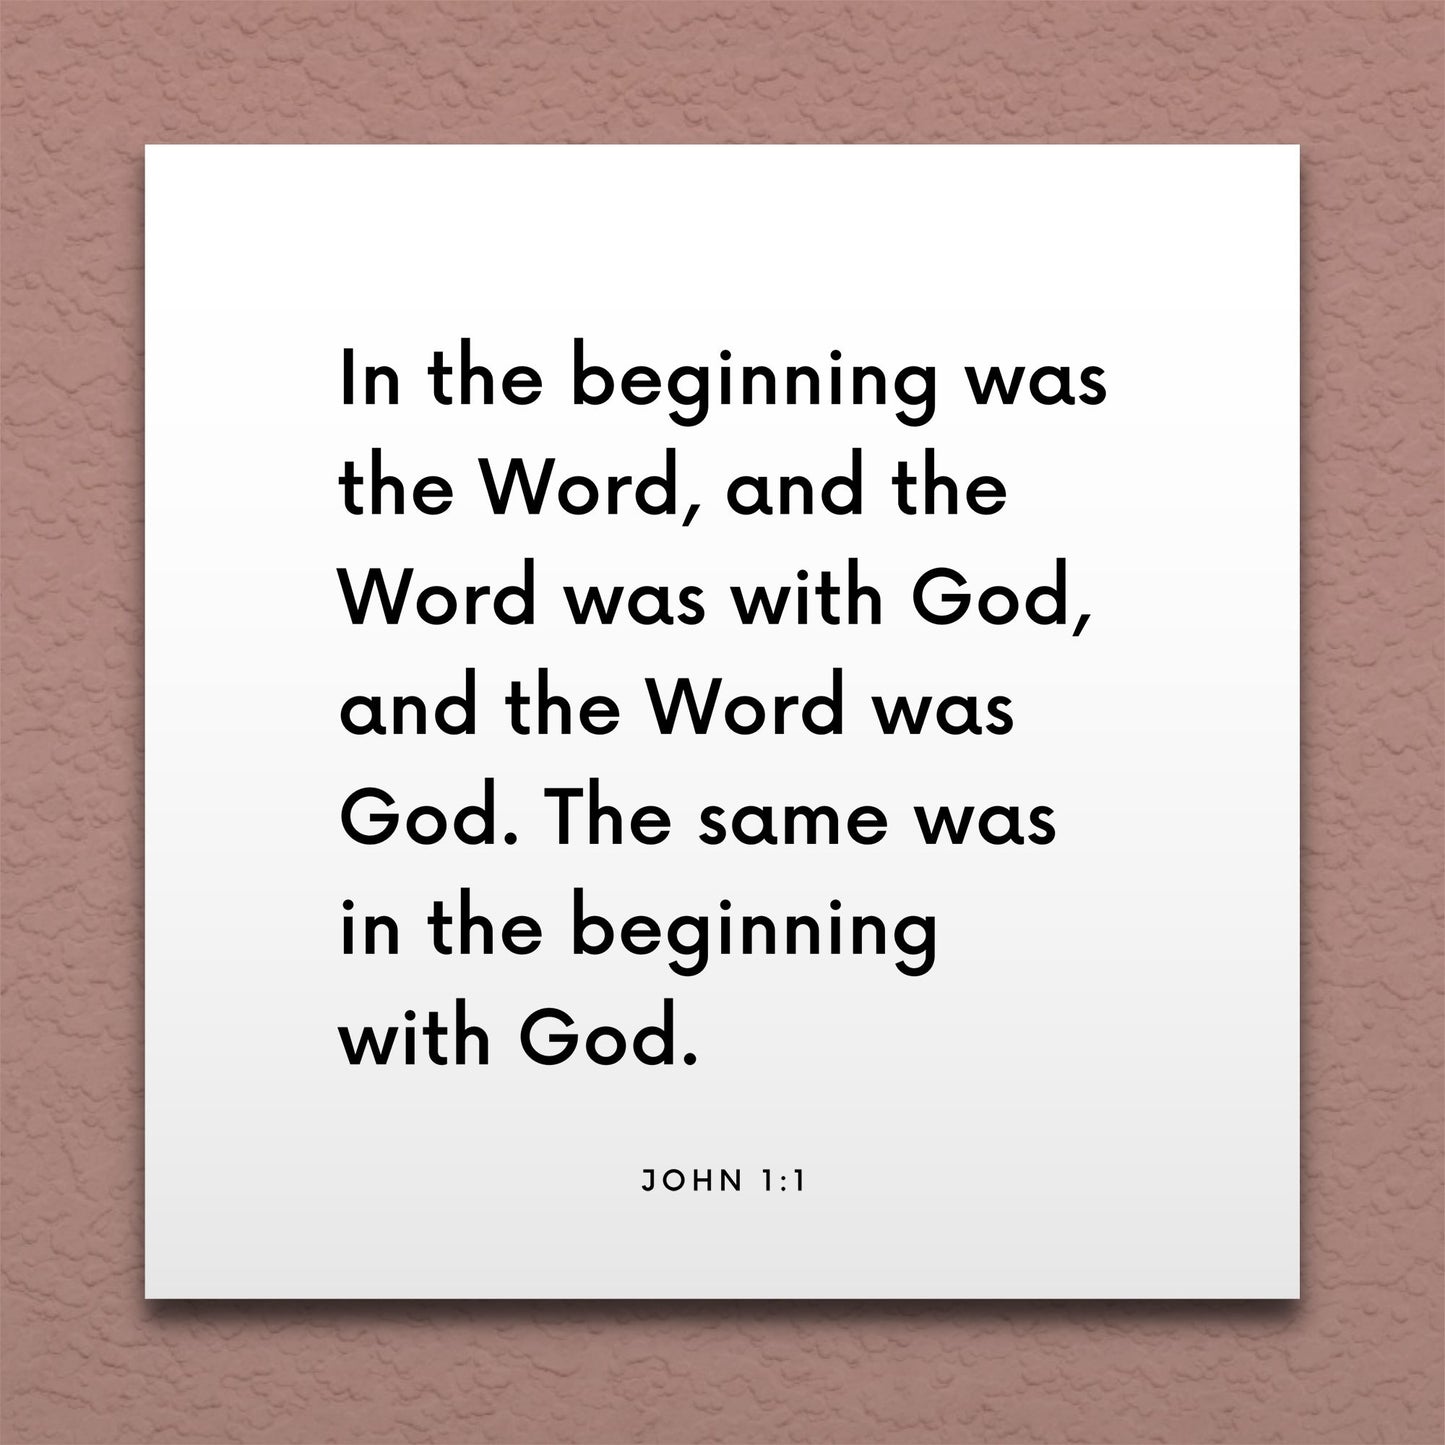 Wall-mounted scripture tile for John 1:1 - "In the beginning was the Word, and the Word was with God"